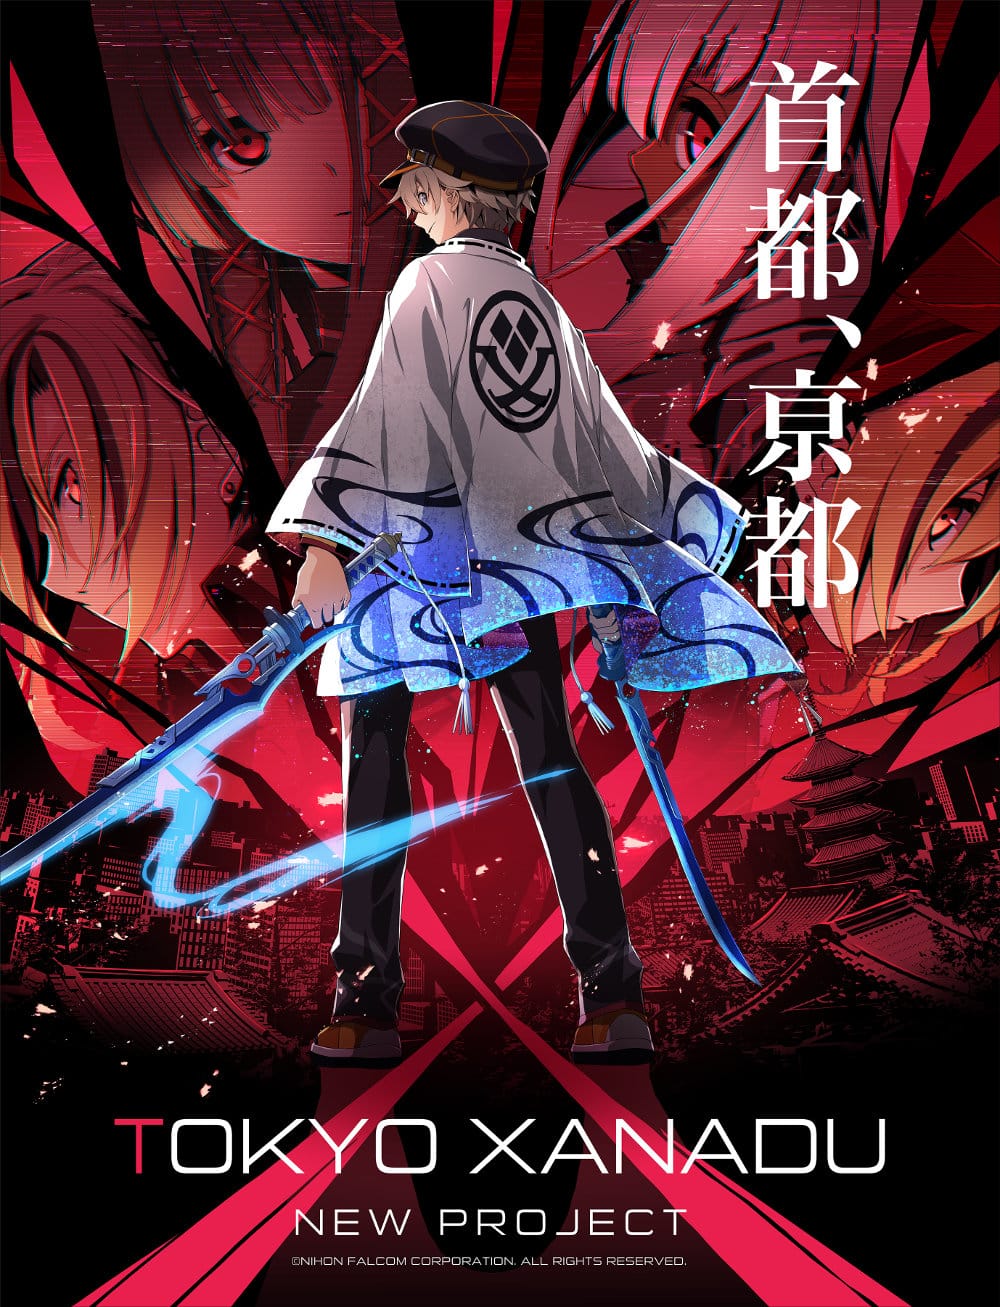 Official artwork of the new Tokyo Xanadu game